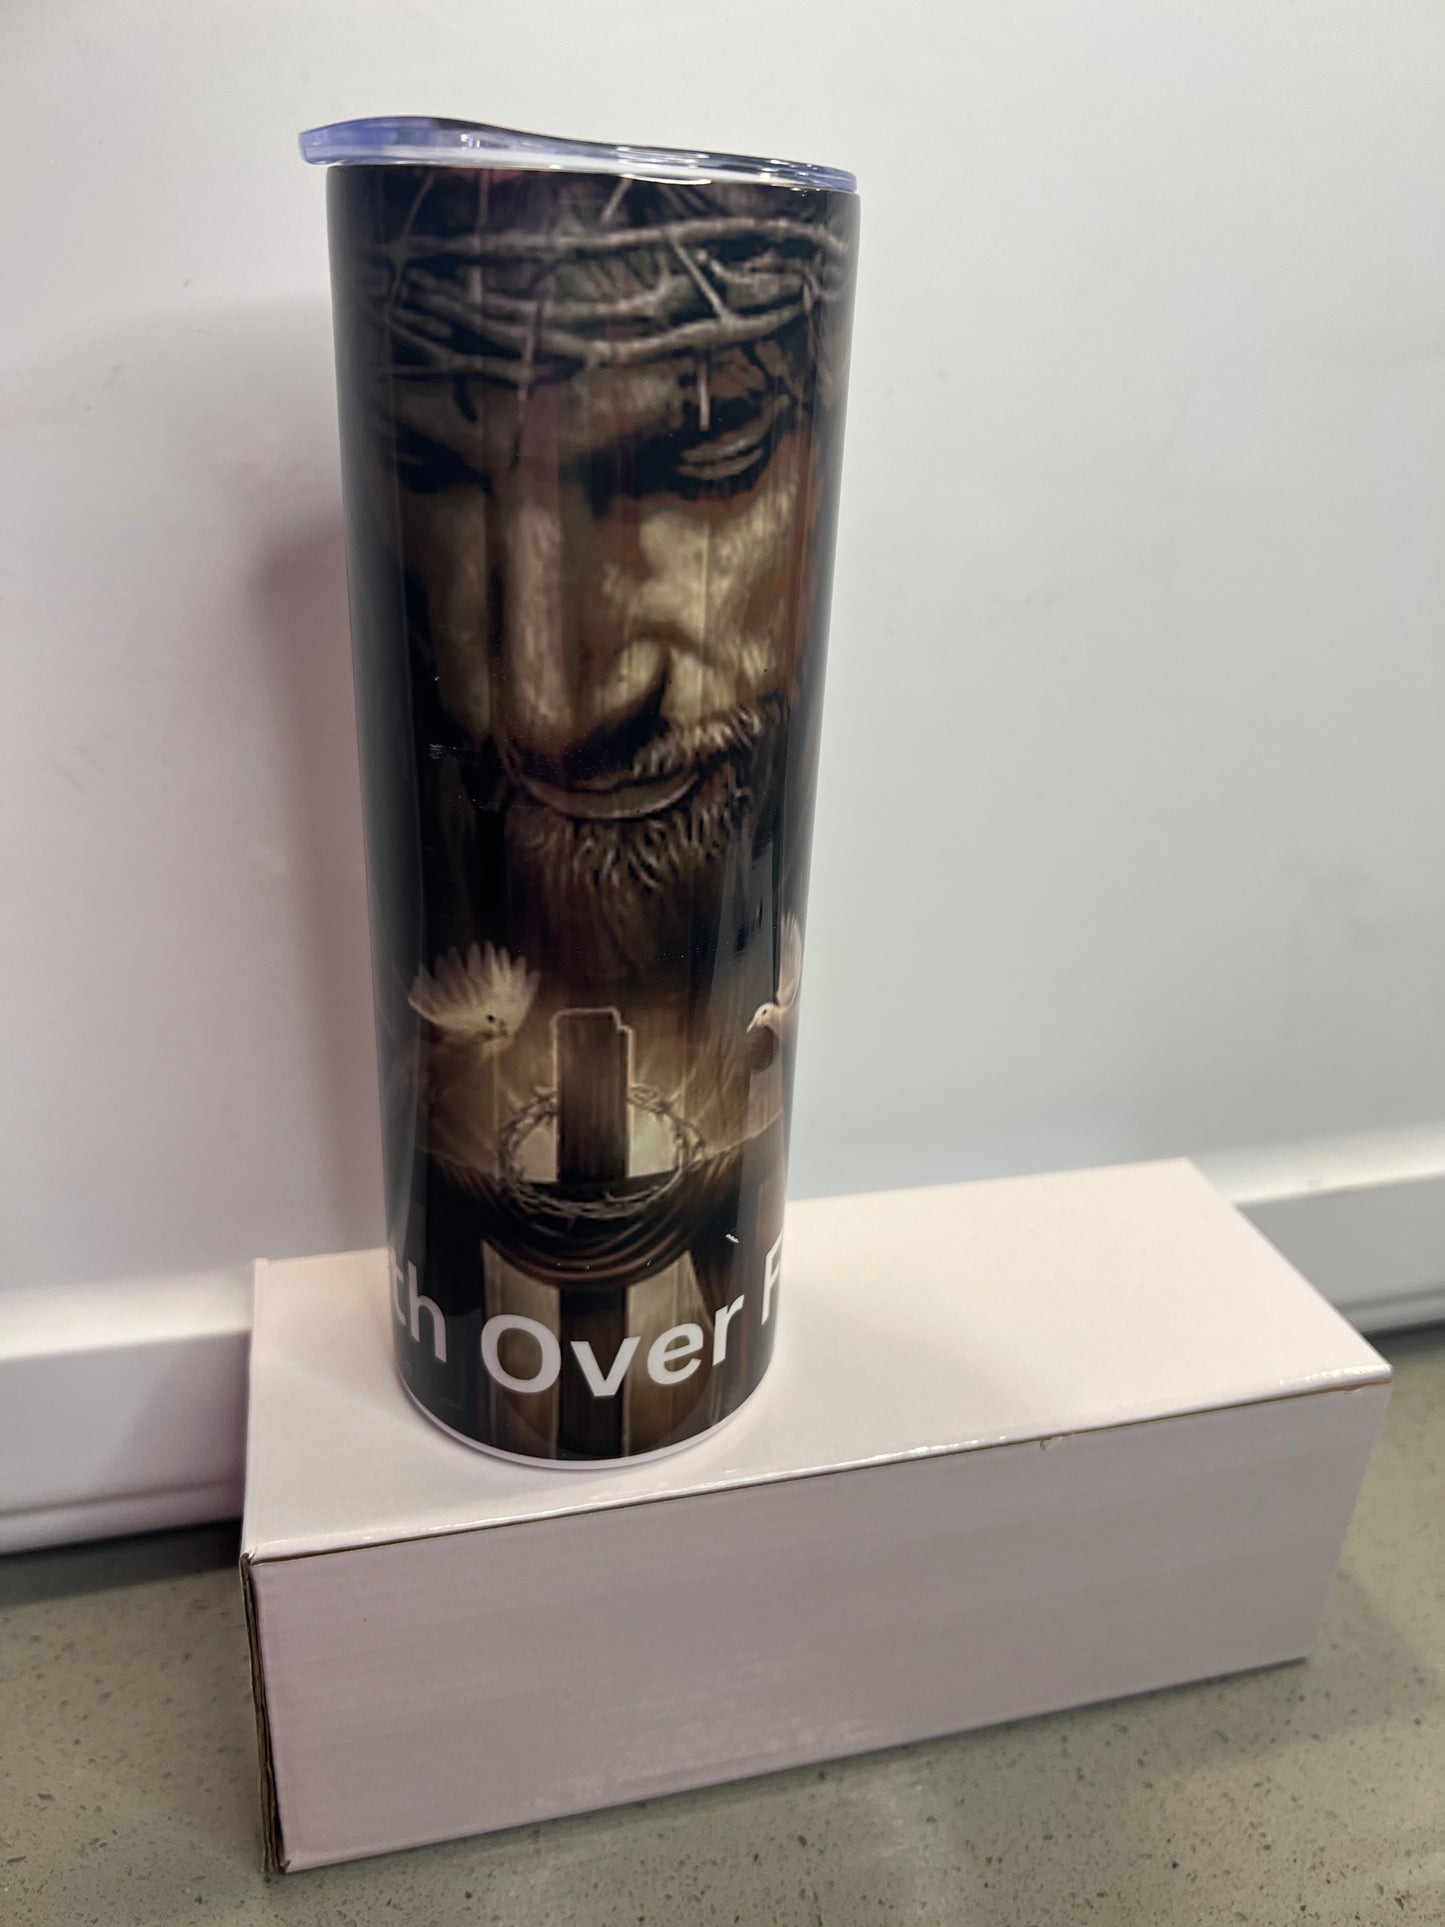 Faith Over Fear - 20 oz Stainless Steal Tumbler with Lid and Straw